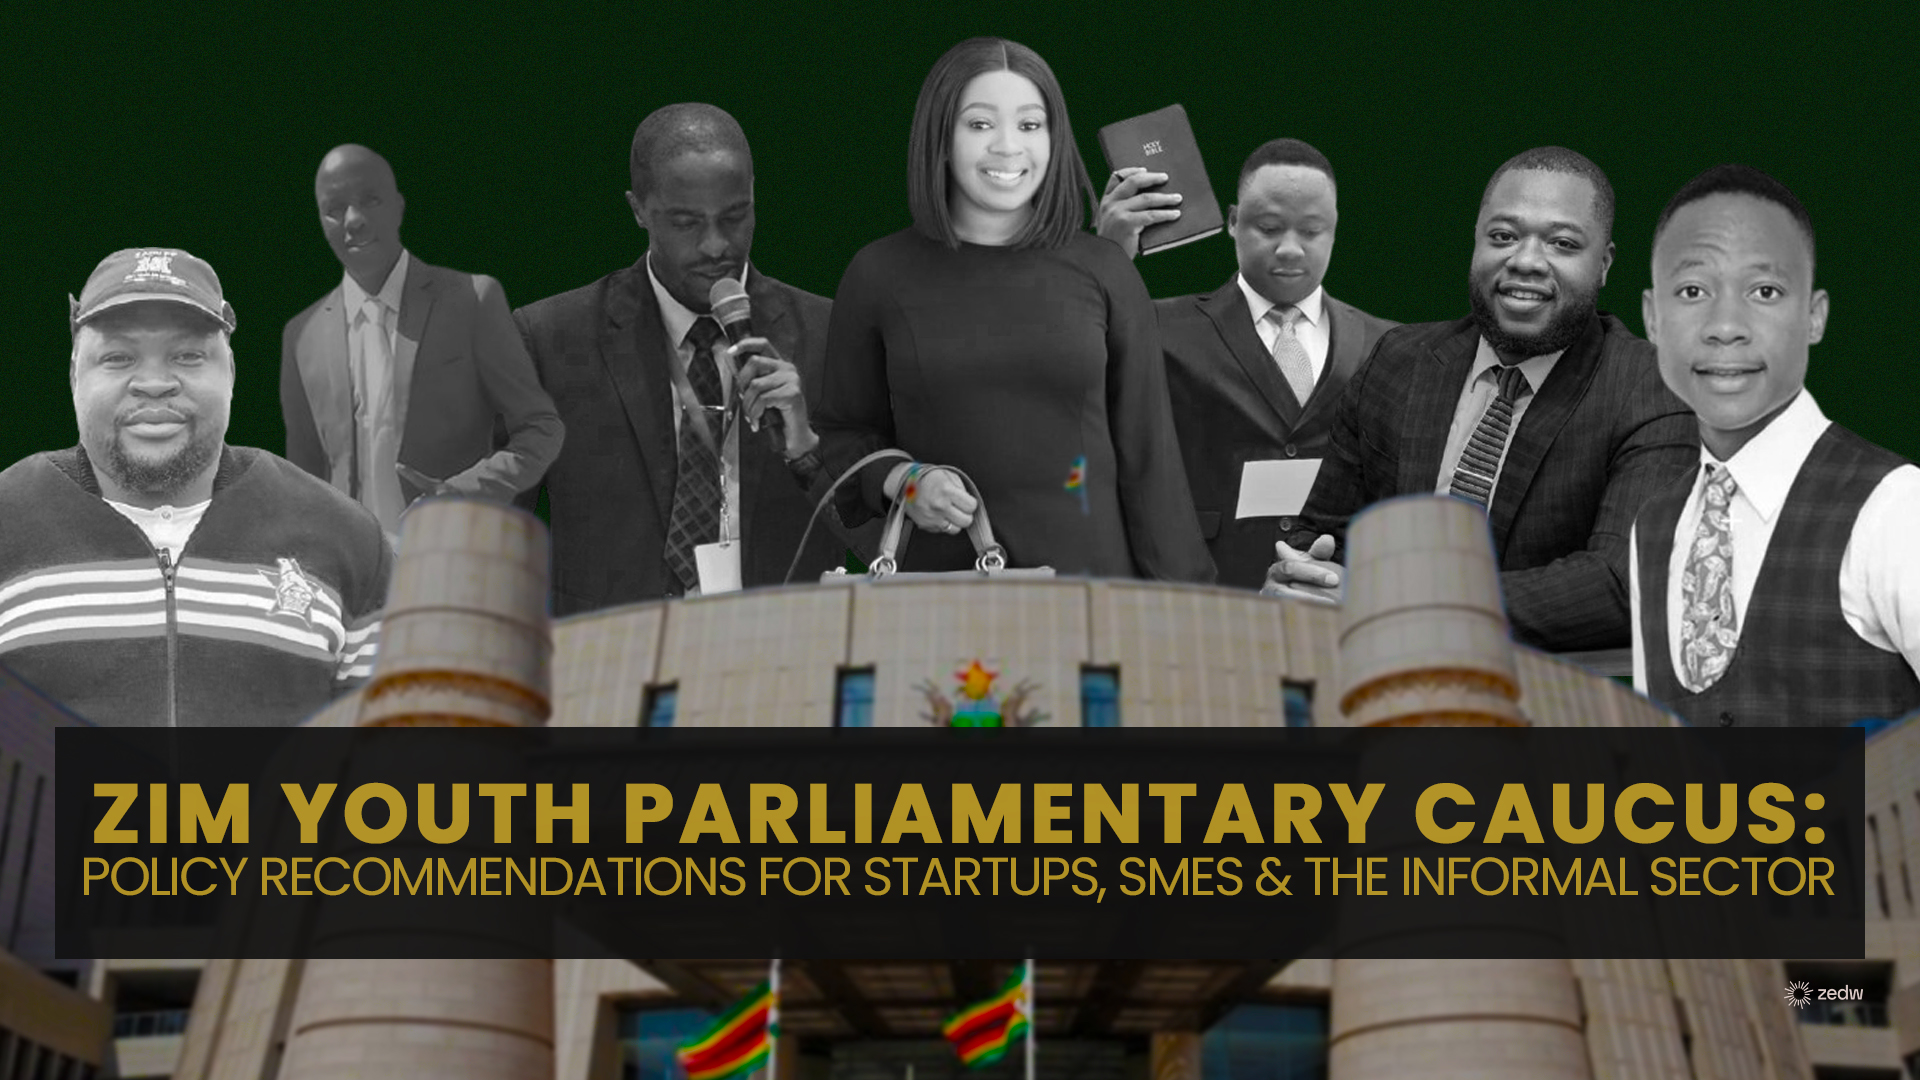 Zim Youth Parliamentary Caucus: Policy Recommendations for Startups, SMEs & the Informal Sector